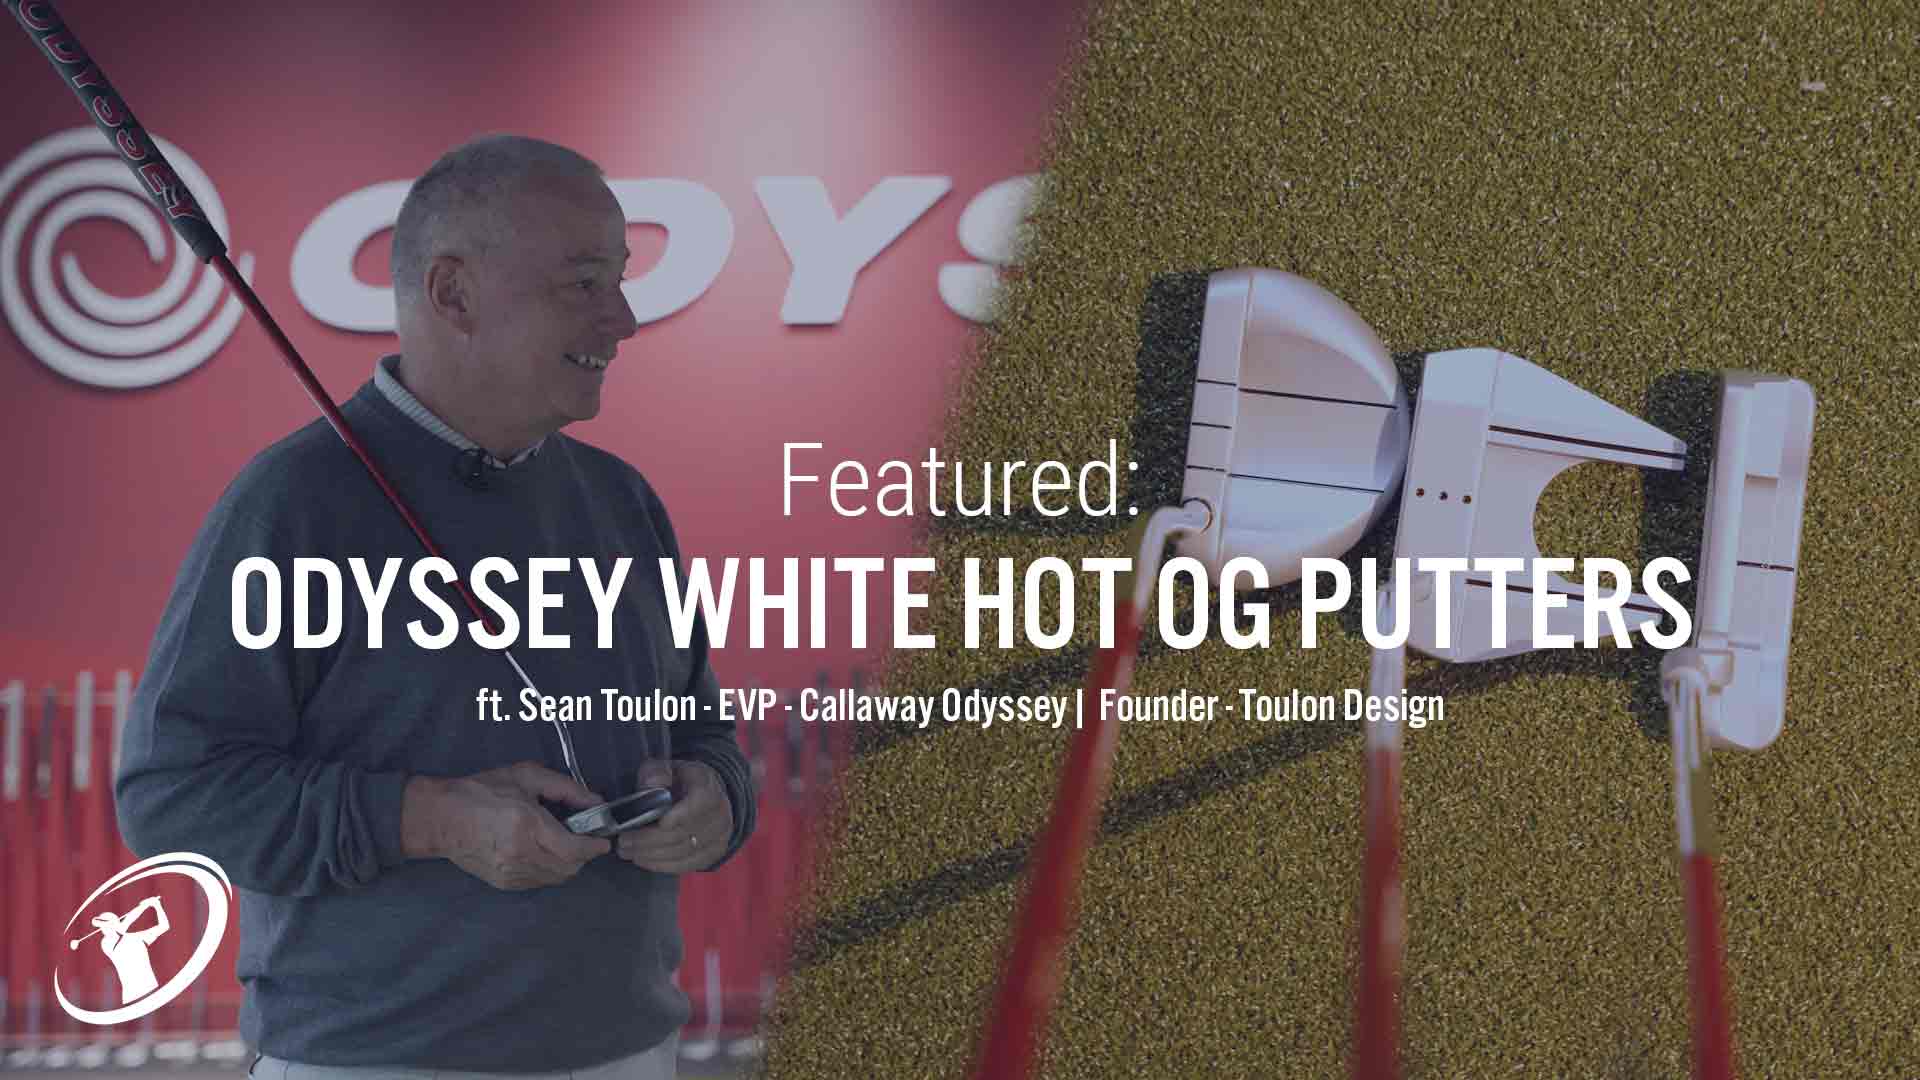 Sean Toulon breaks down Odyssey's iconic White Hot OG putter line